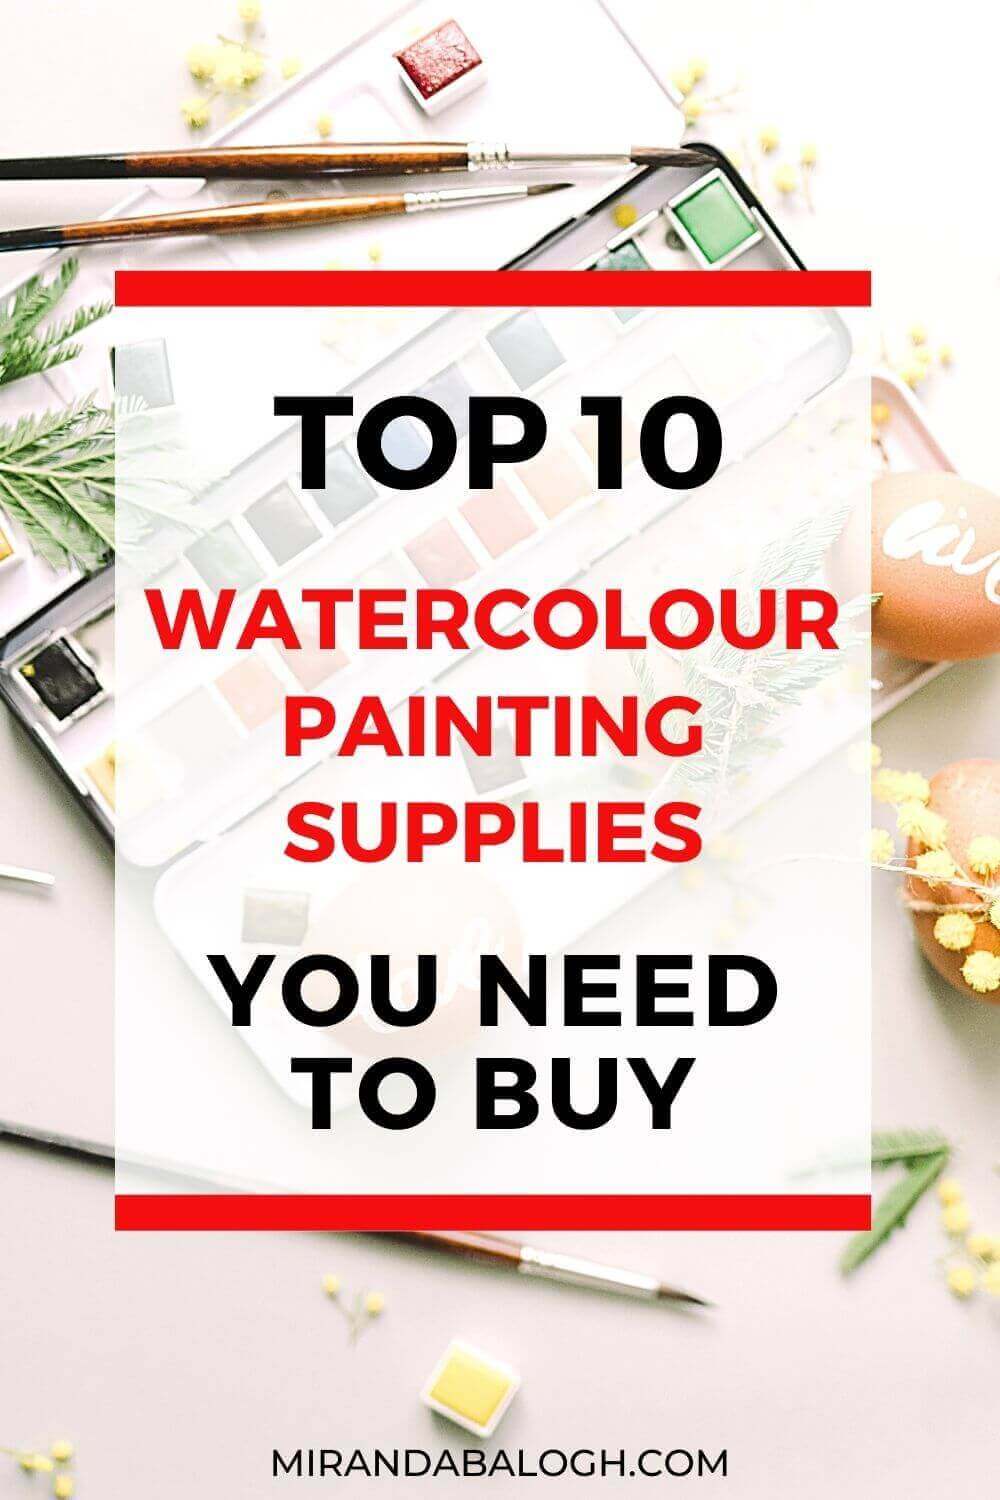 As an artist, you need to learn about the essential watercolour painting supplies that will set you up for success. So click here for a supplies guide to learn about which recommended products are best suited for beginner artists. Find out about the best affordable watercolour supplies including watercolour brushes, watercolour paper, and paint sets. Best of all, these art supplies can be purchased online!